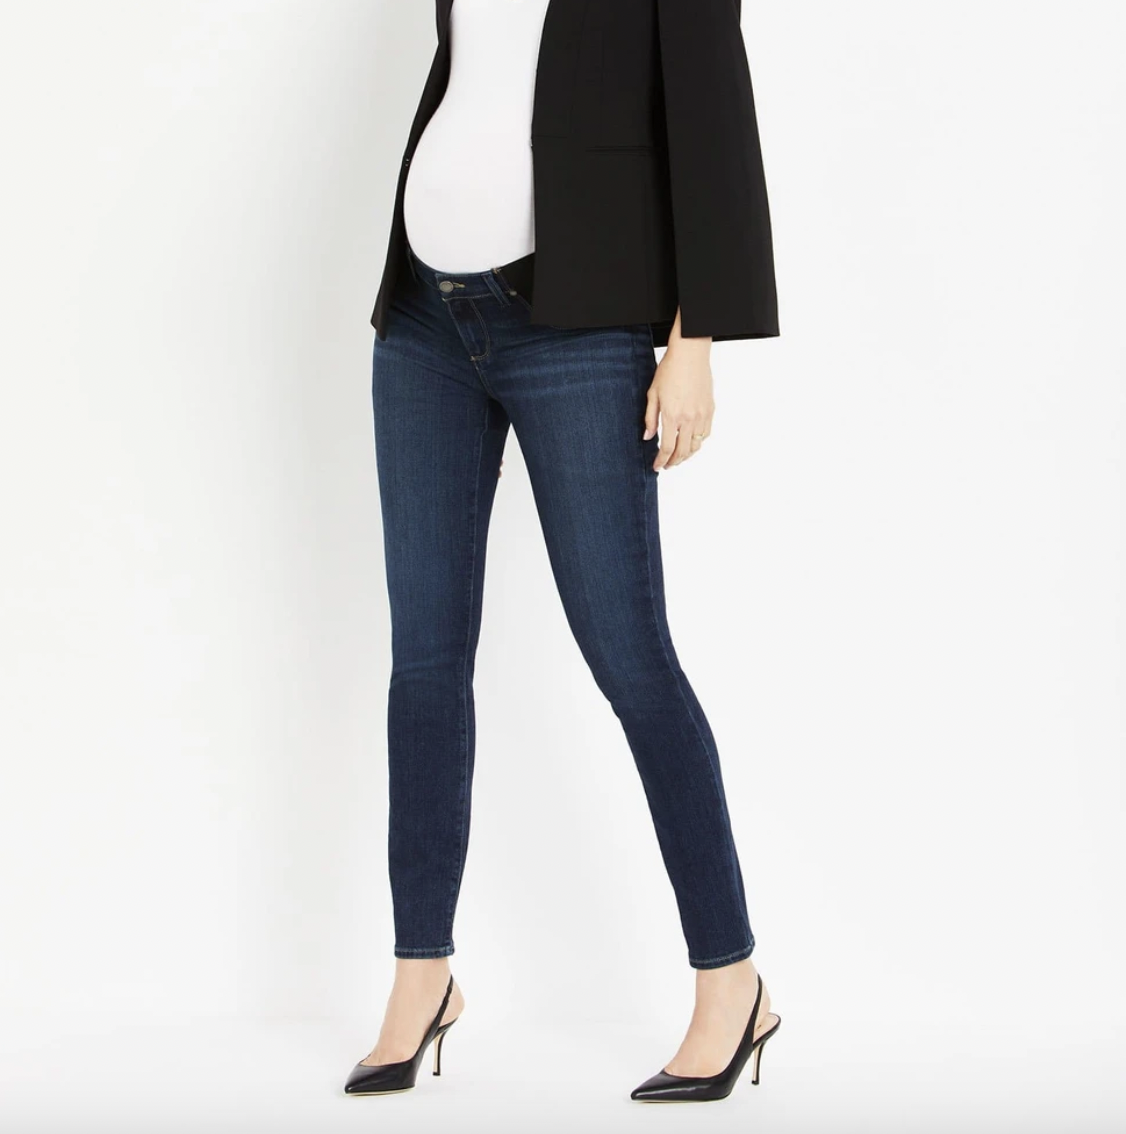 MATERNITY JEANS REVIEW: 13 PAIRS OF MATERNITY JEANS AND WHAT